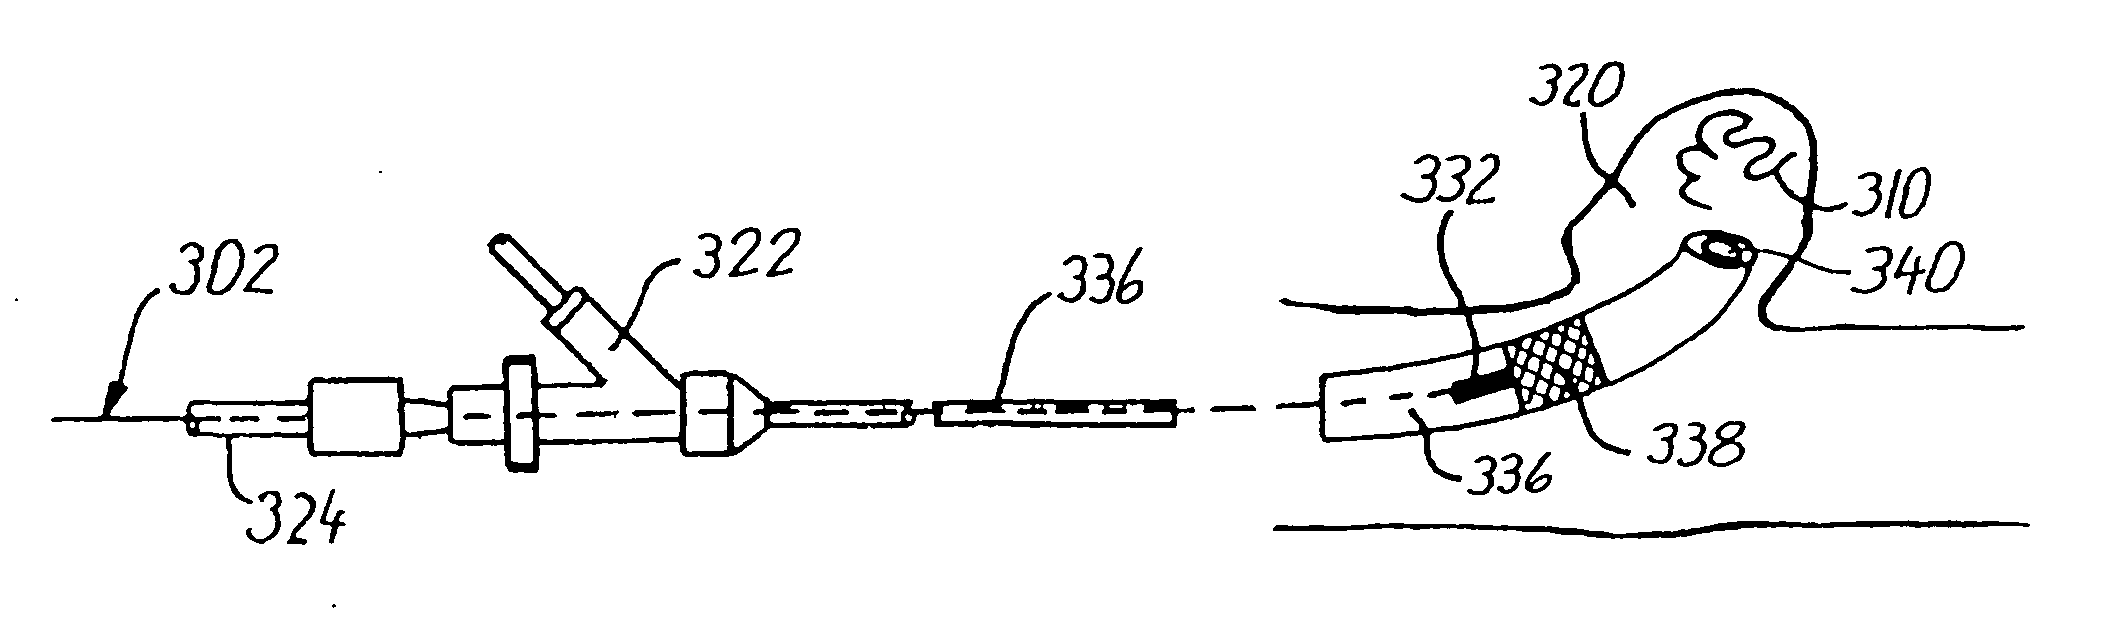 Endovascular medical device with plurality of wires